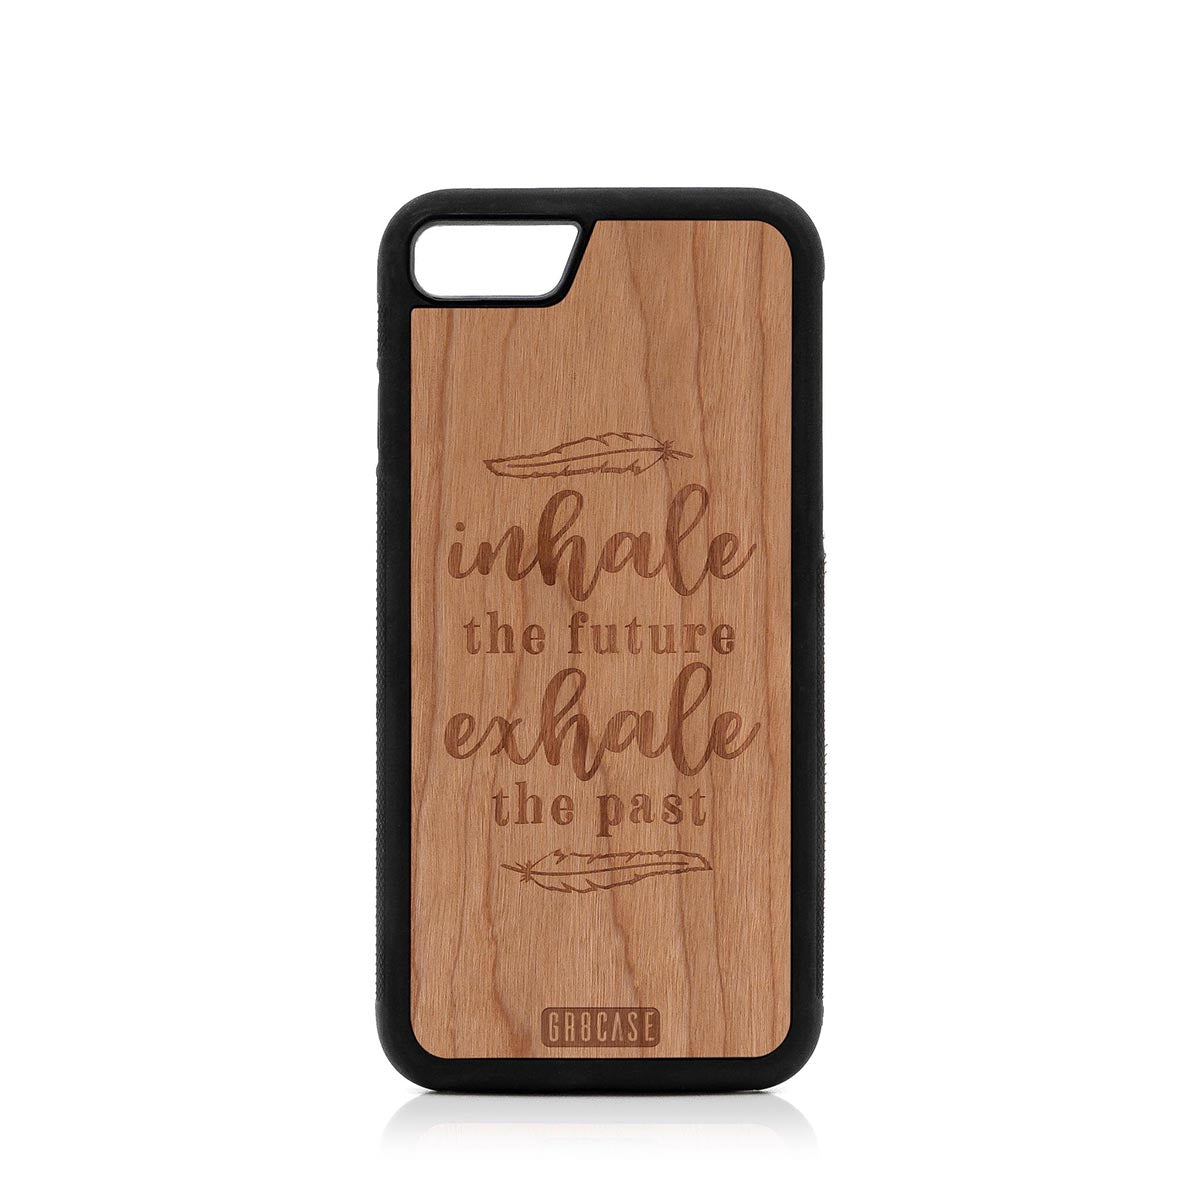 Inhale Future Exhale The Past Design Wood Case For iPhone 7/8 by GR8CASE